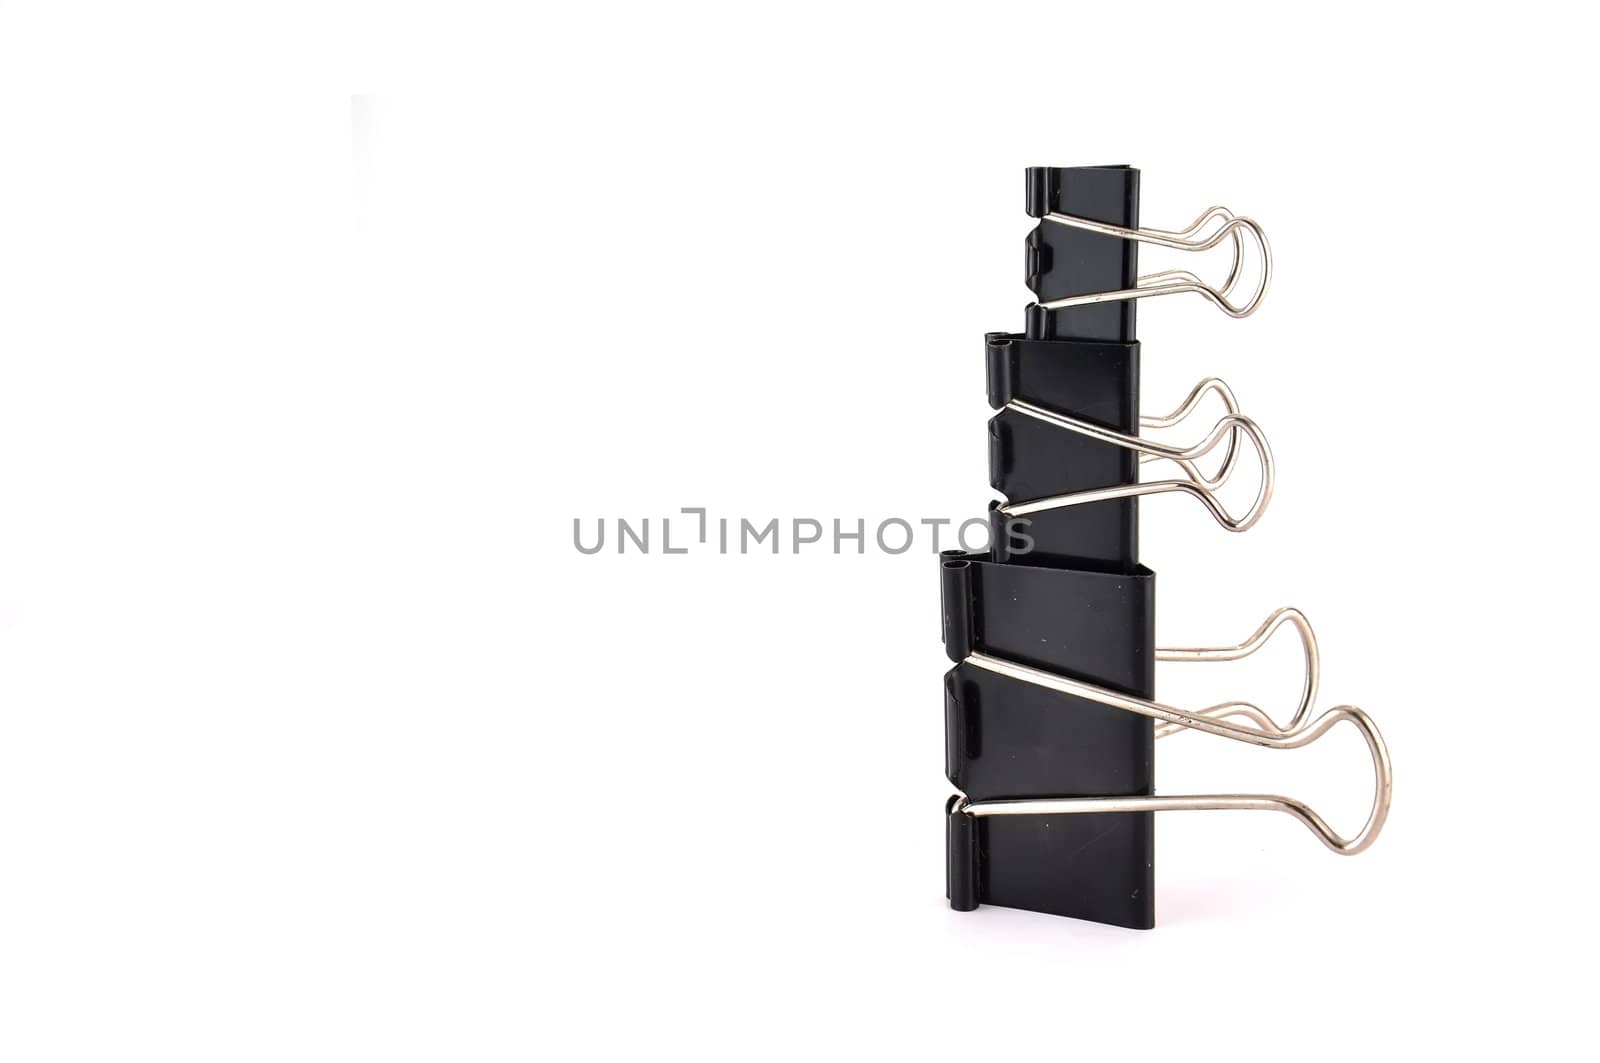 Black paper clips on white background